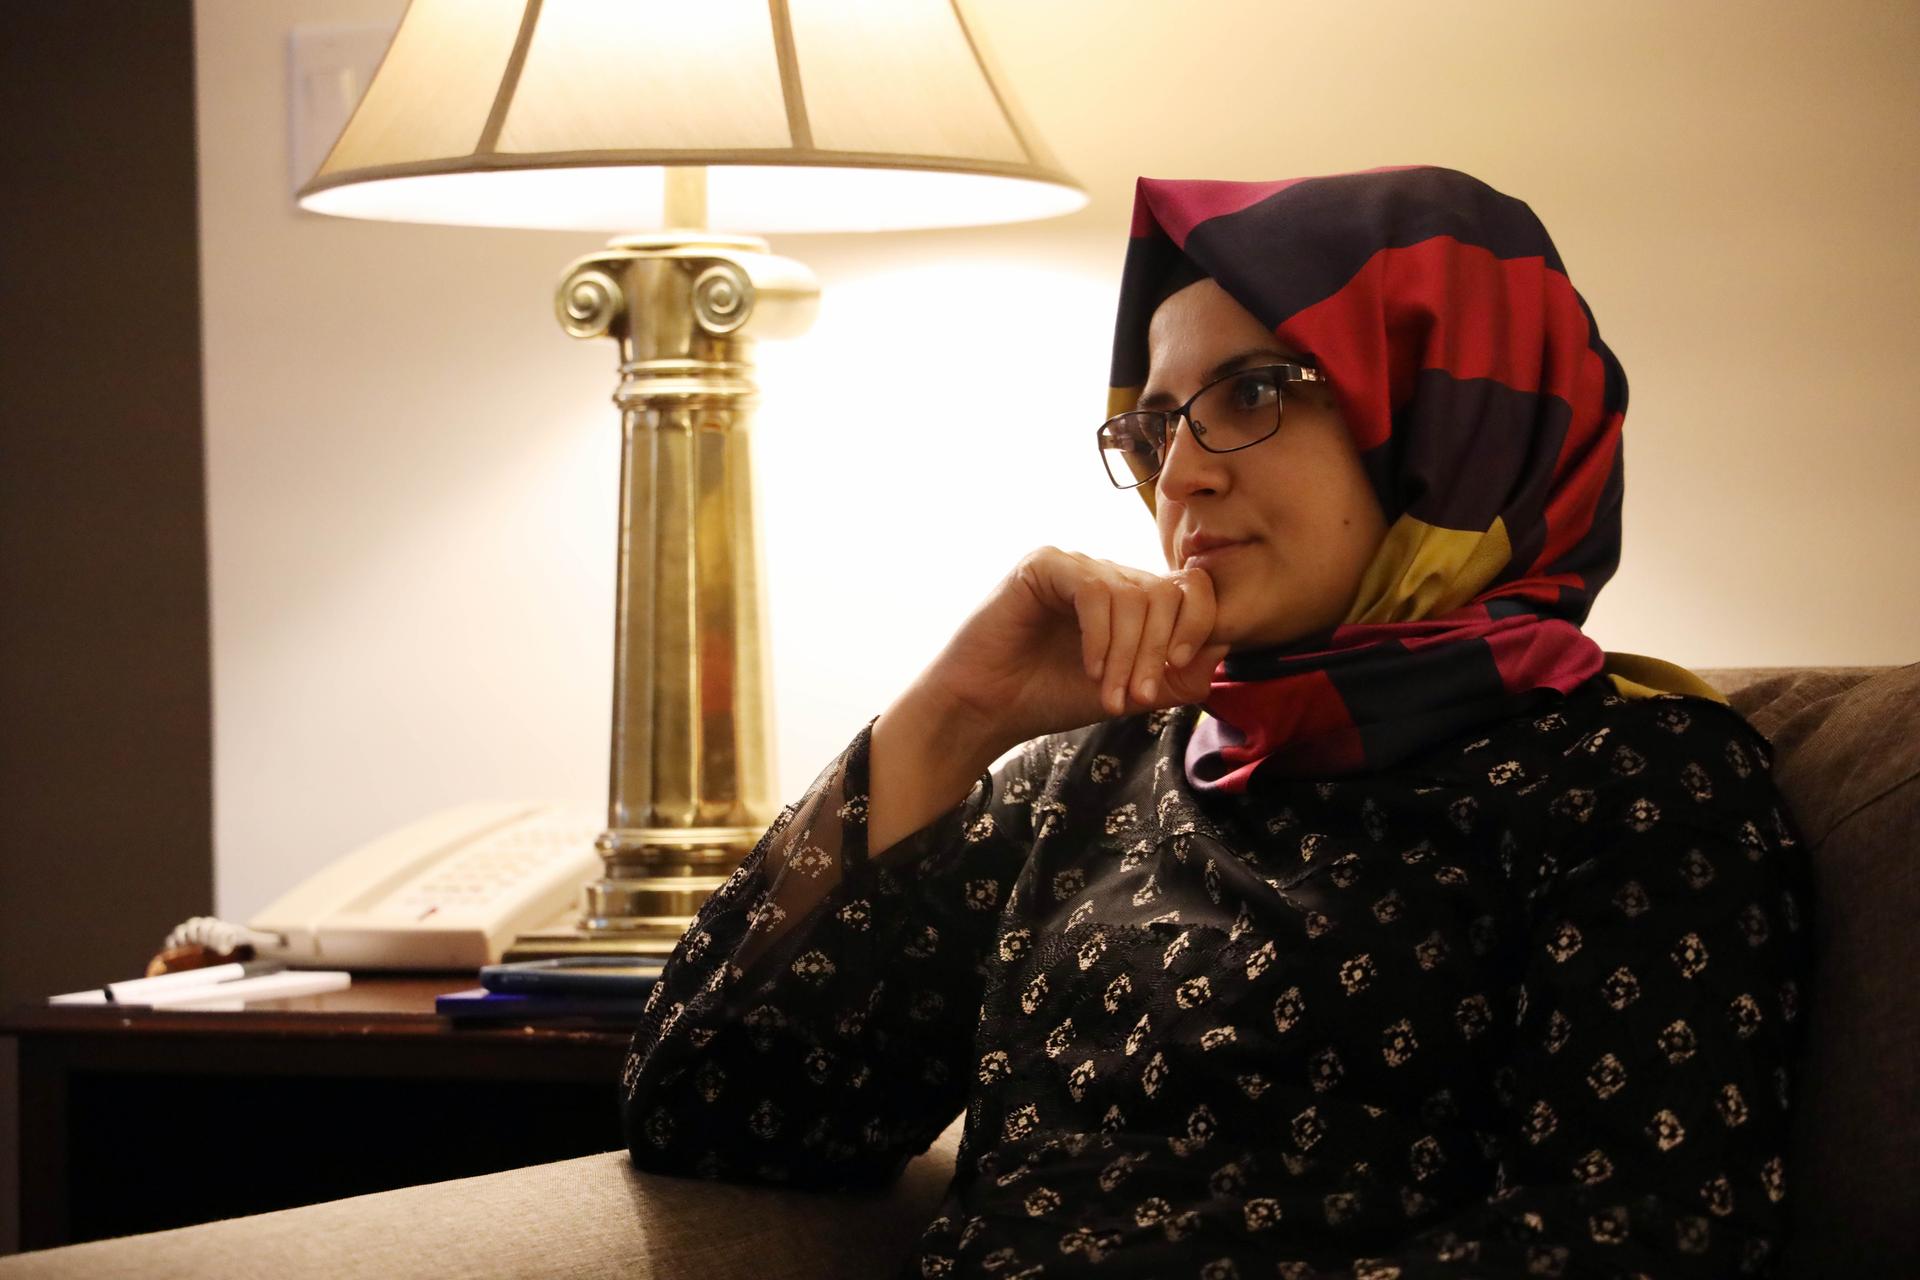 A woman in a headscarf sits on a couch